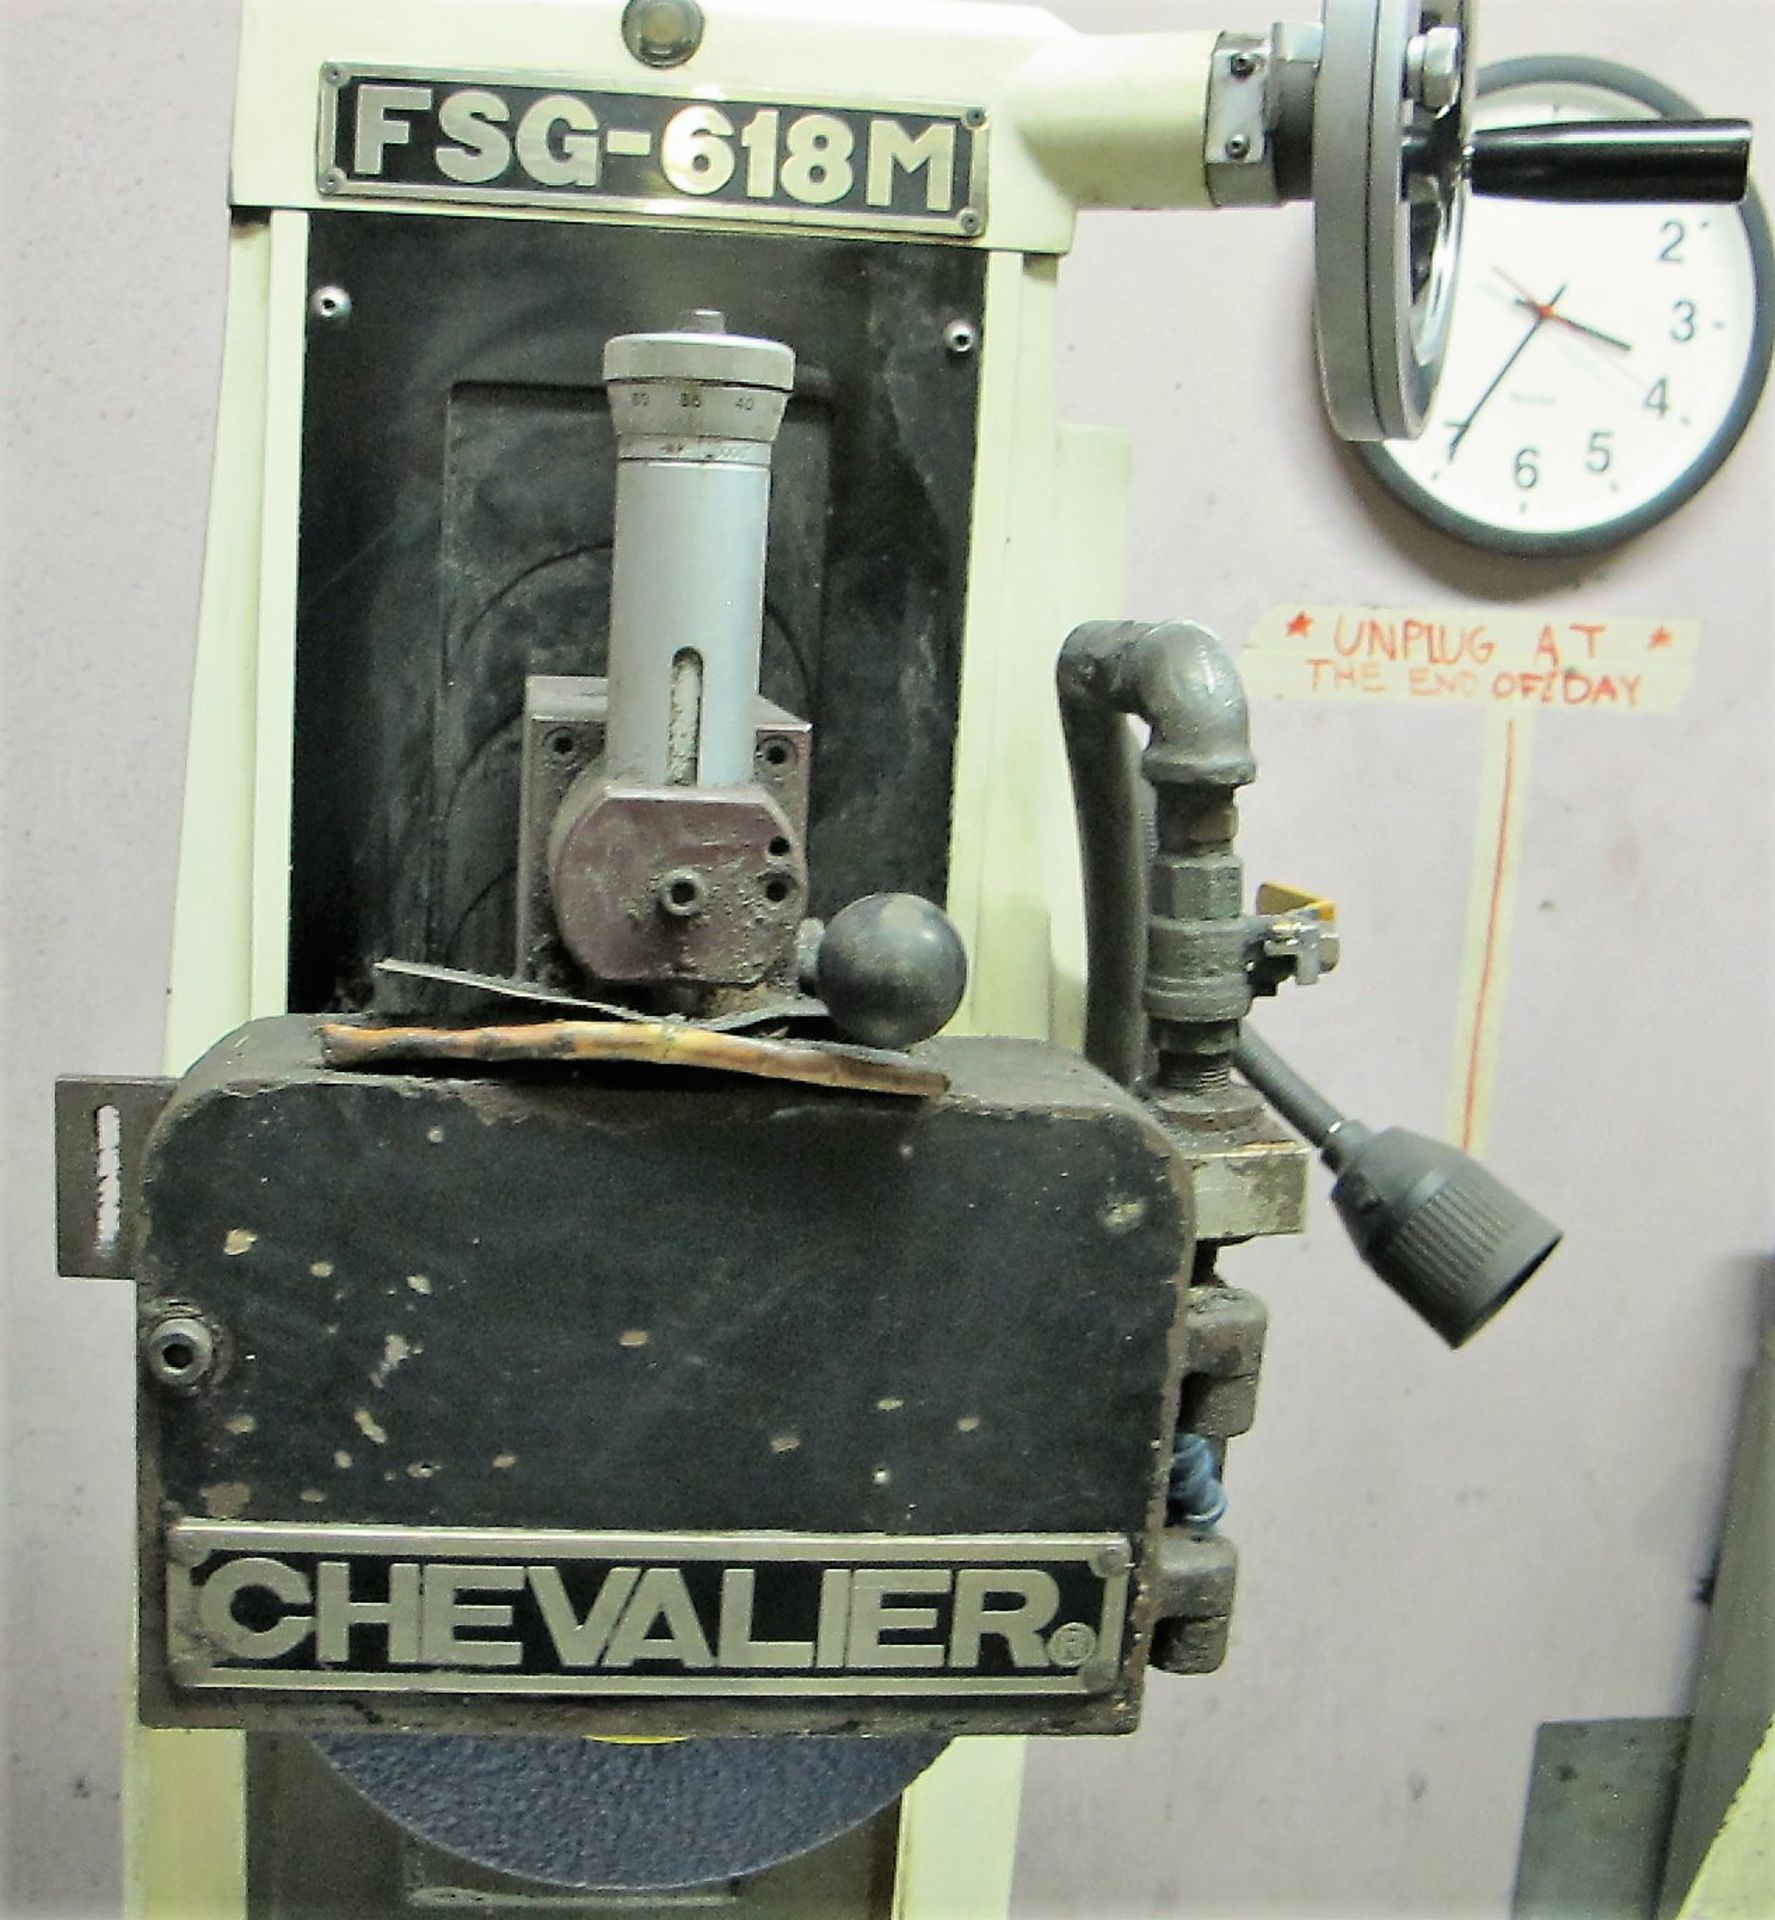 CHEVALIER FSG-618M SURFACE GRINDER, 6" X 18" MAGNETIC SURFACE PLATE, S/N A3935011 - Image 2 of 5